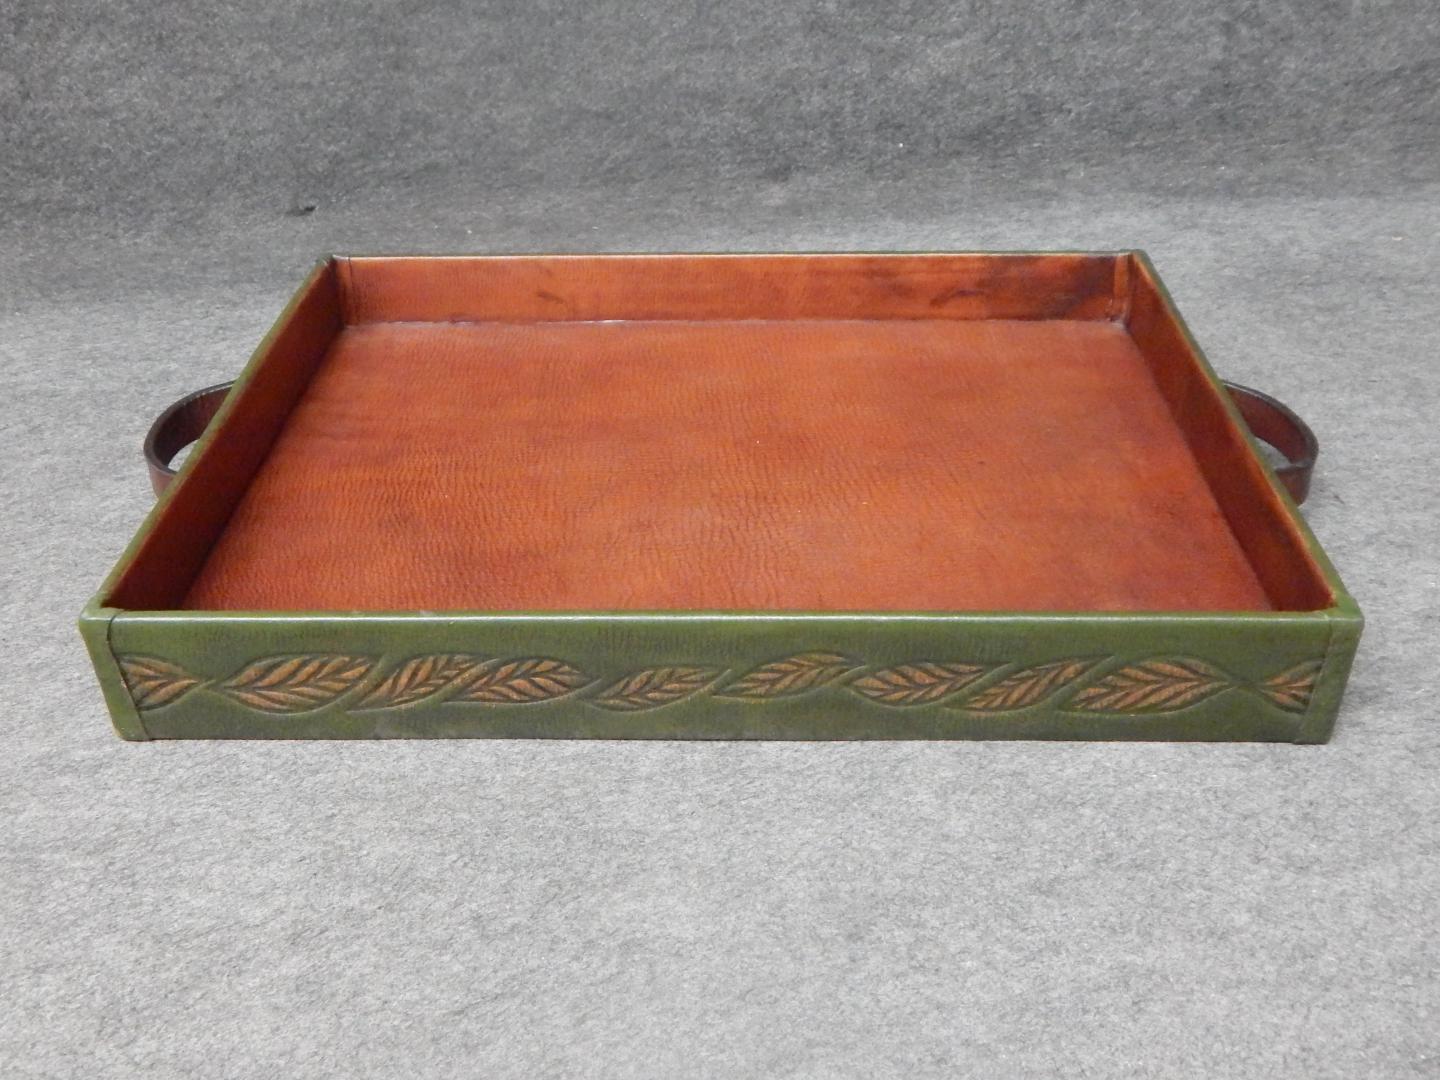 Large Rectangular Tray, Leafs high-relief